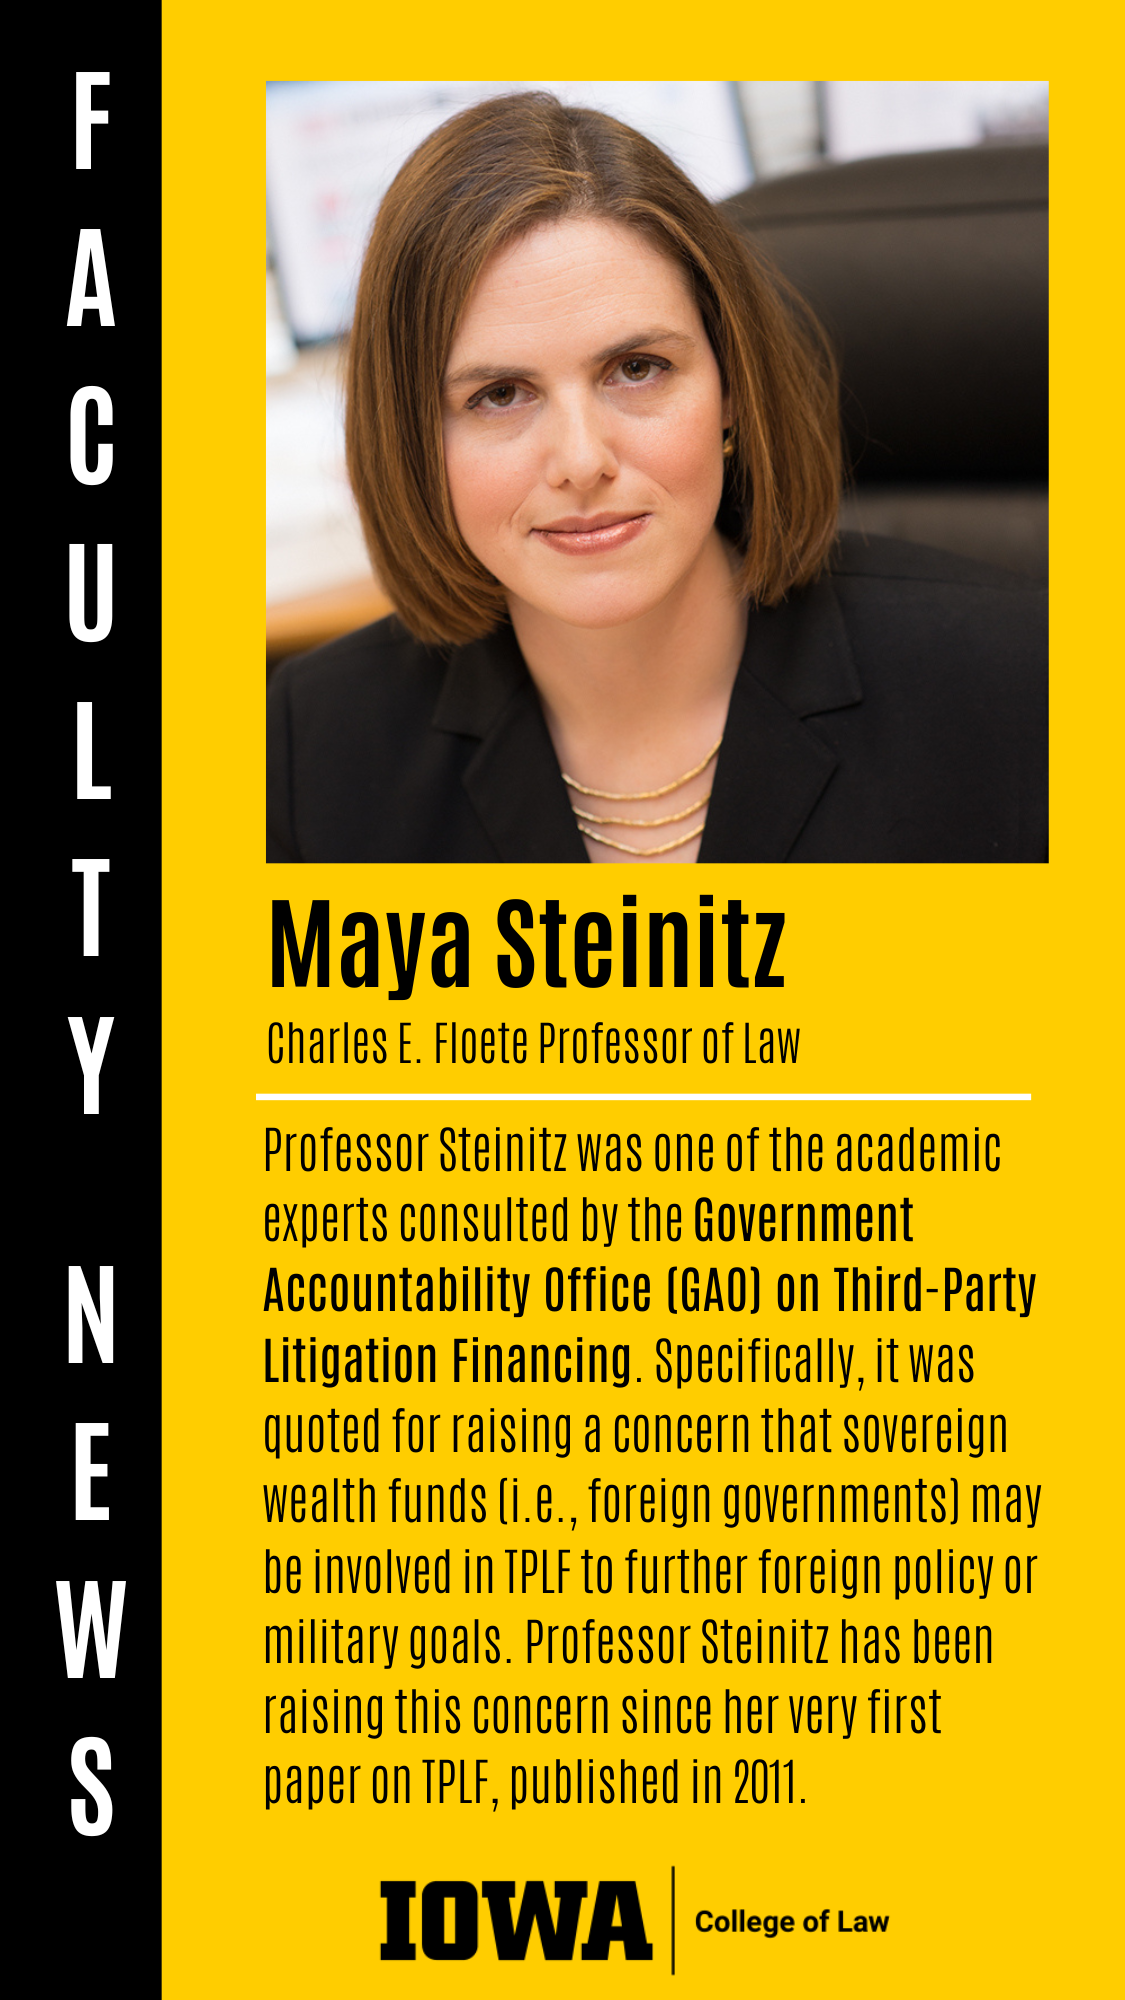 Maya Steinitz Charles E. Floete Professor of Law Professor Steinitz was one of the academic experts consulted by the Government Accountability Office (GAO) on Third-Party Litigation Financing. Specifically, it was quoted for raising a concern that sovereign wealth funds (i.e., foreign governments) may be involved in TPLF to further foreign policy or military goals. Professor Steinitz has been raising this concern since her very first paper on TPLF, published in 2011.